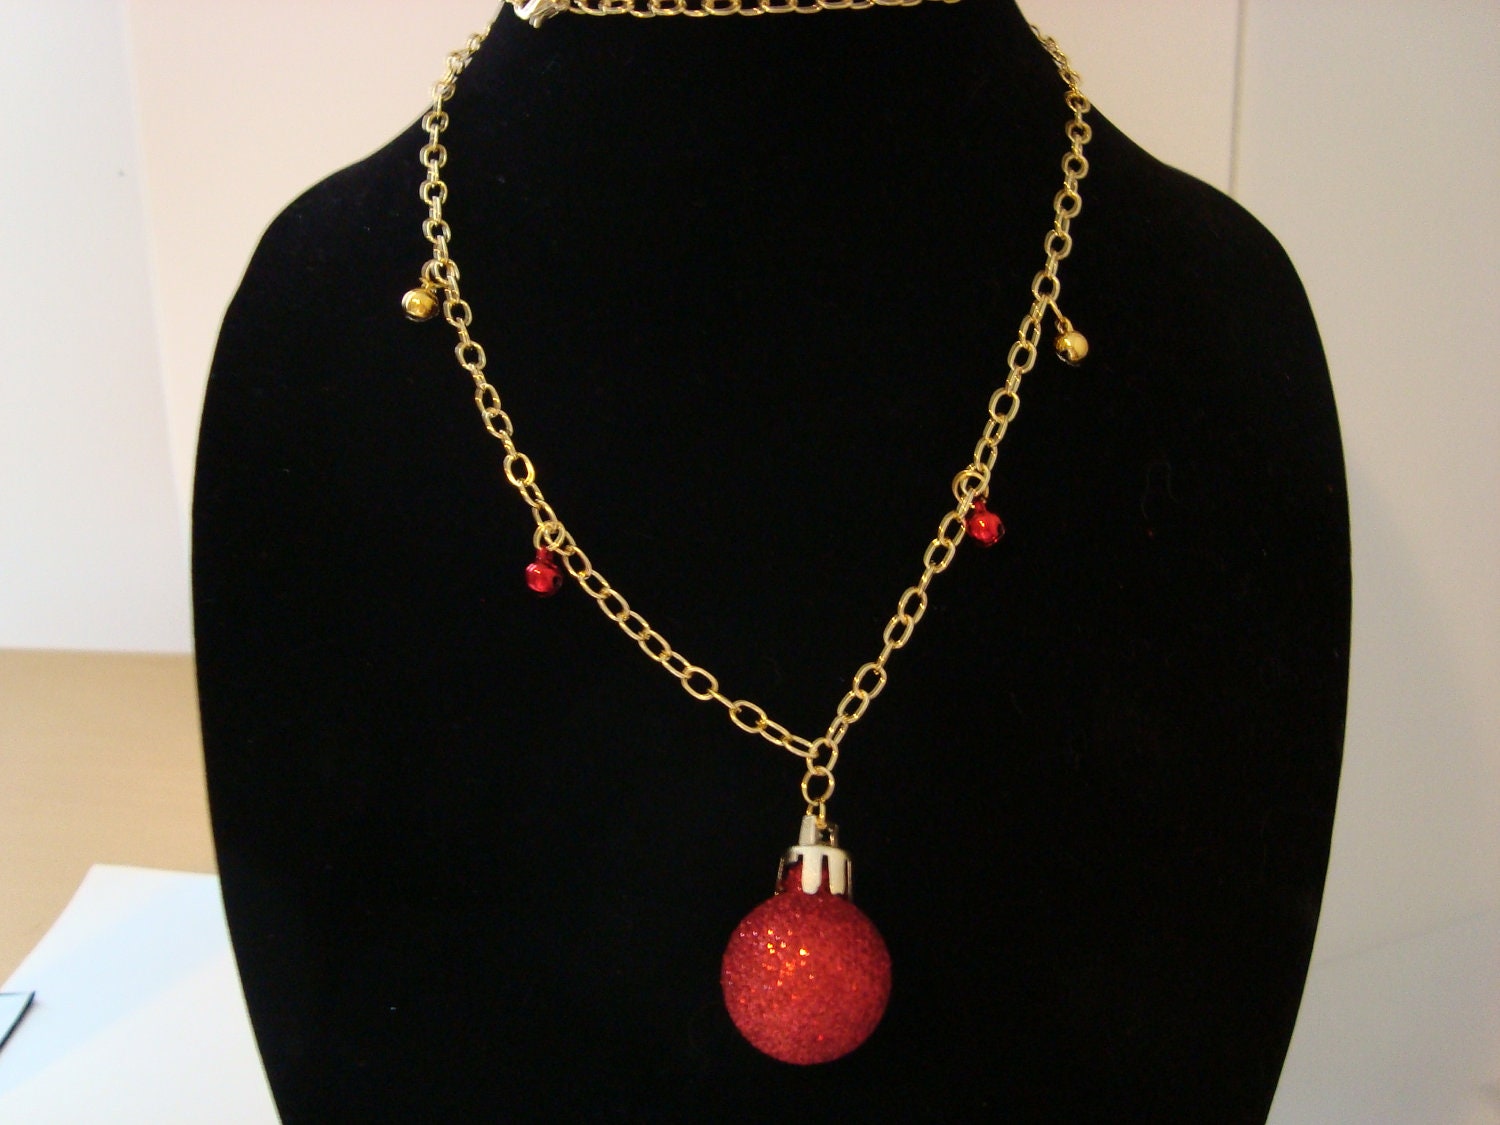 Holiday ornament necklace with jingle bells